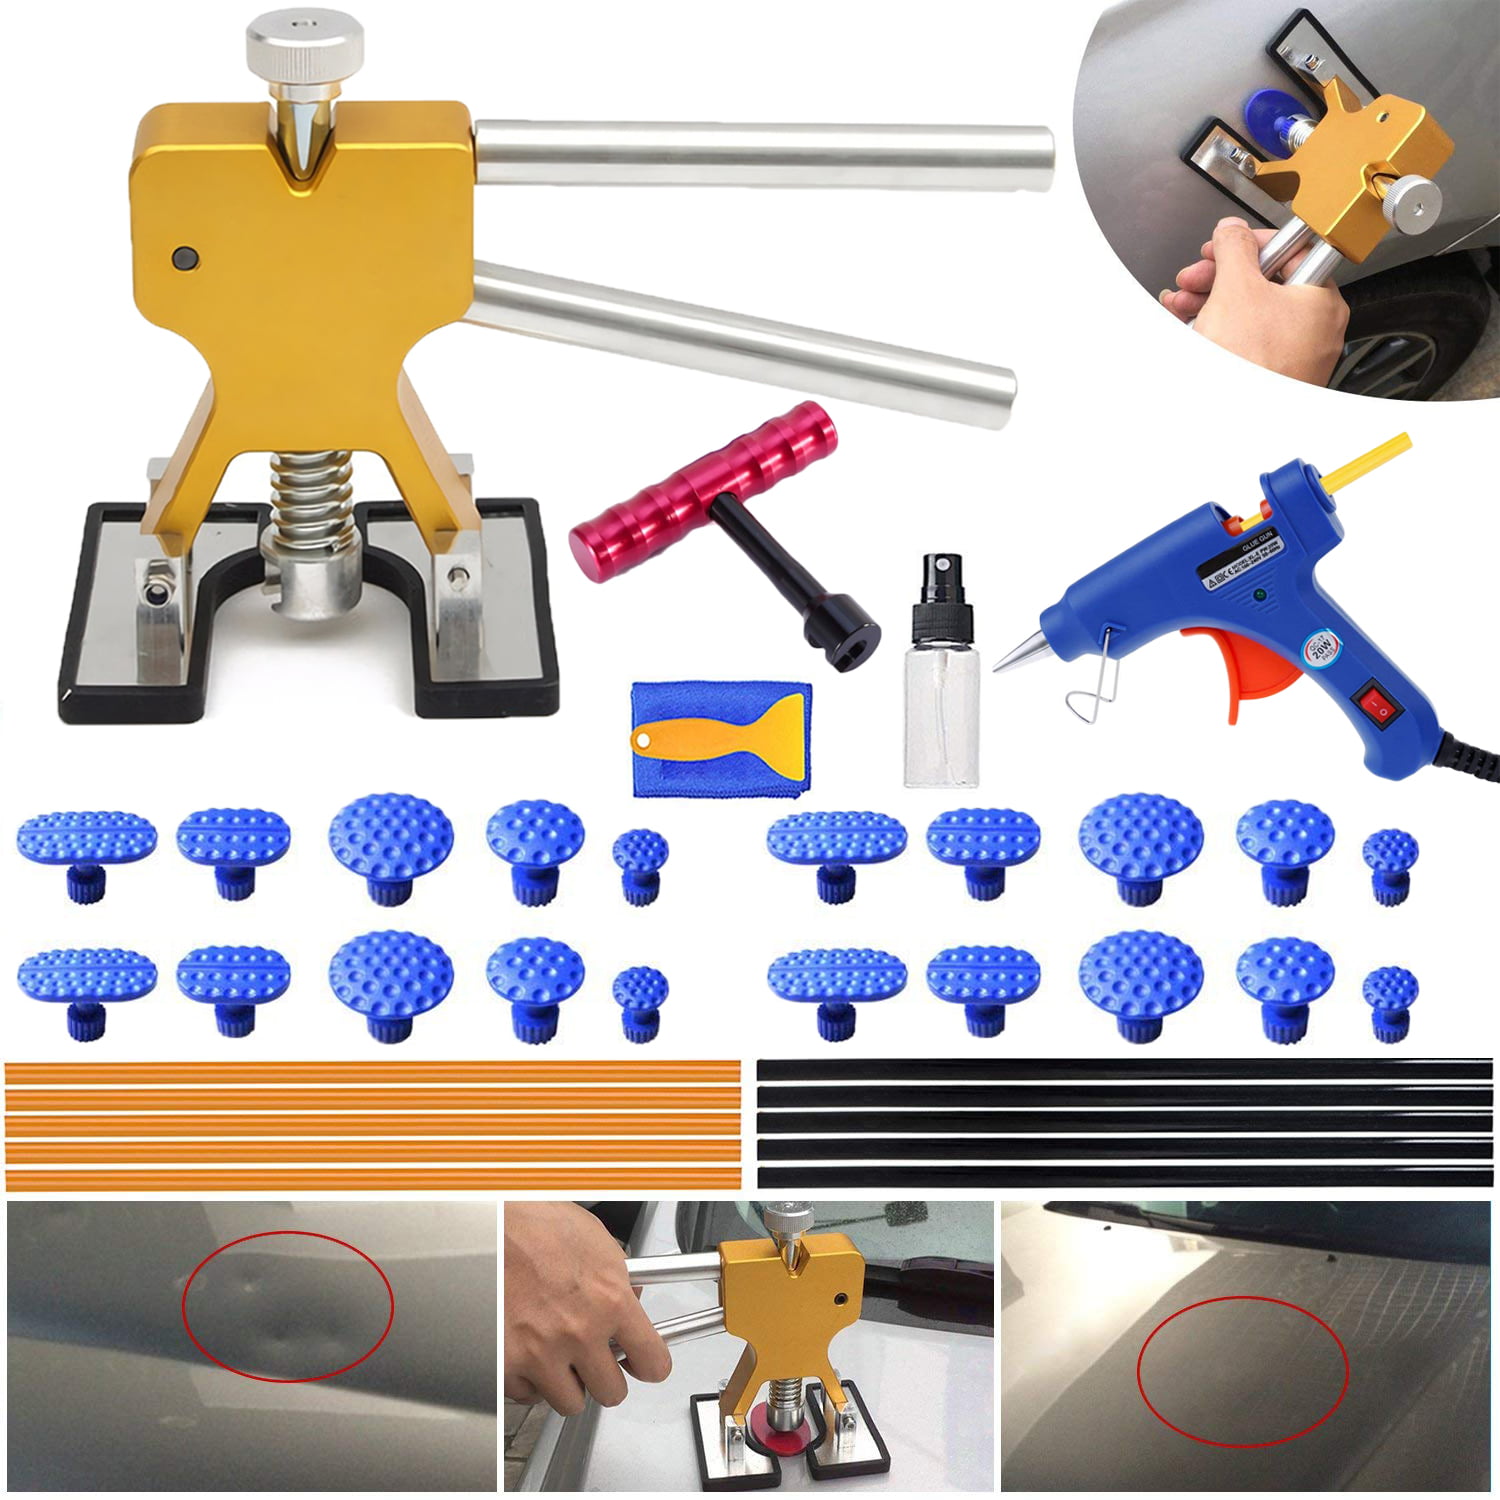 Professional PDR Paintless Car Damage Dent Repair Puller Lifter Line Board Tools 